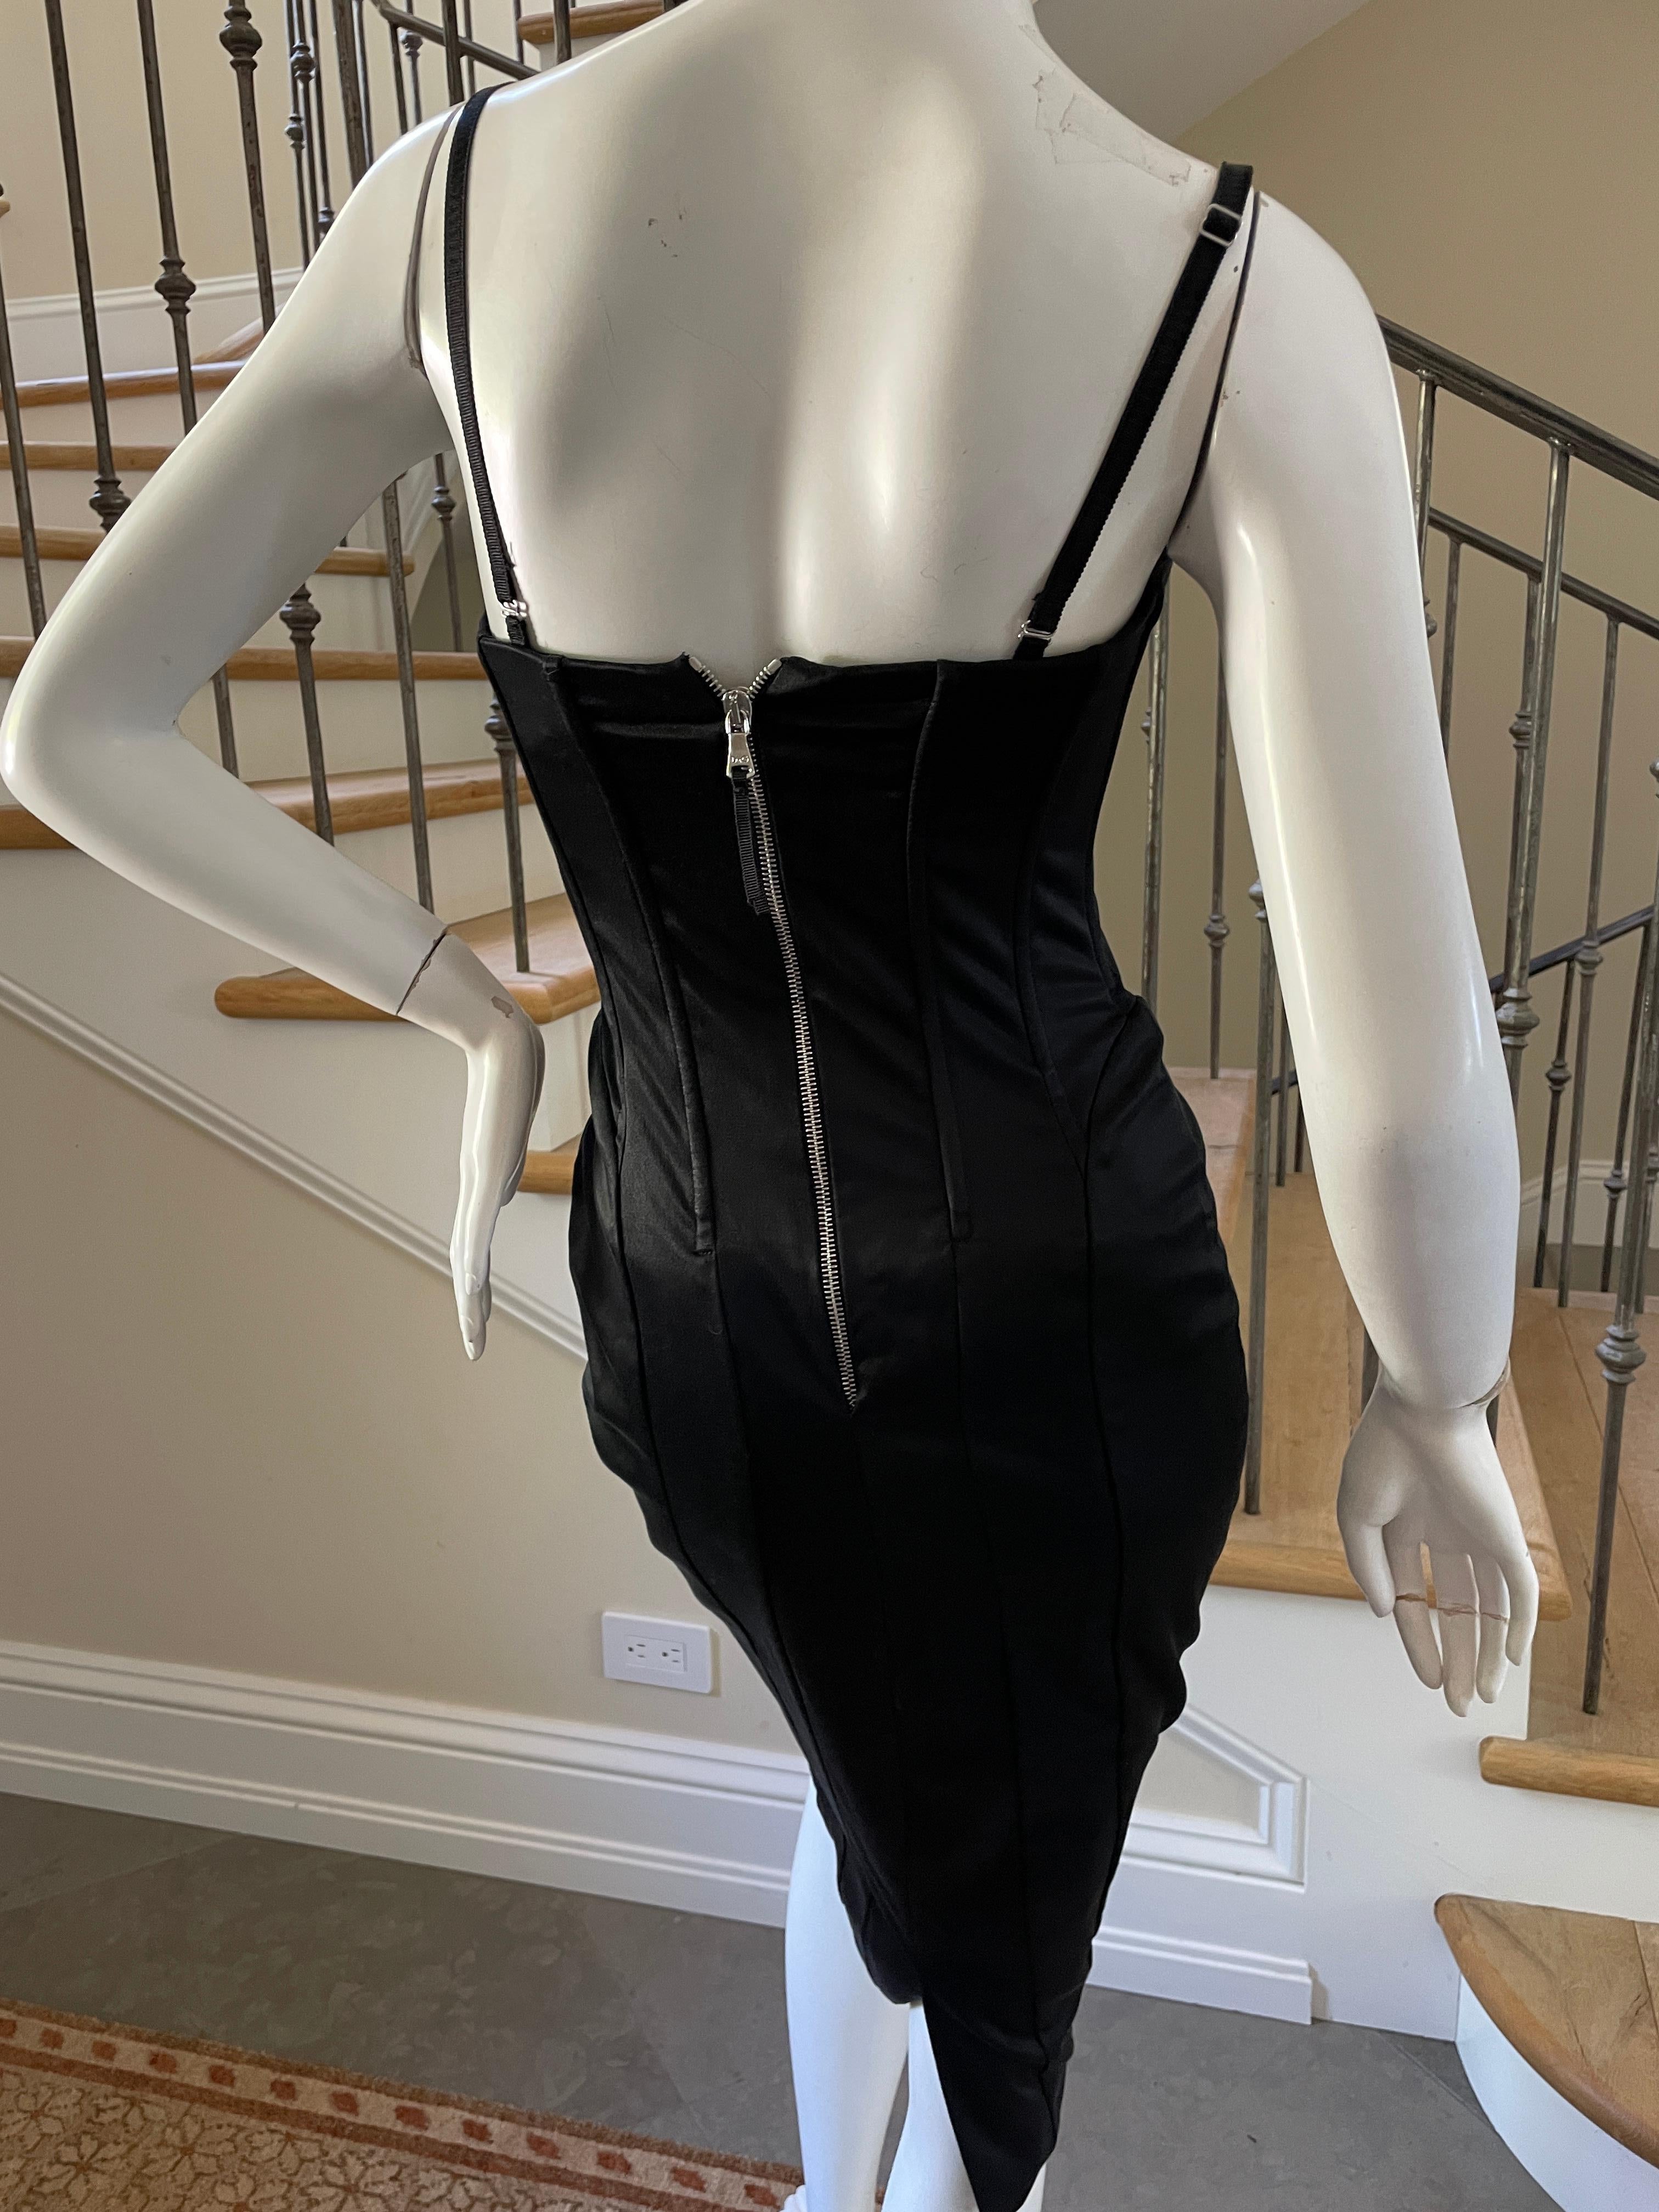 Dolce & Gabbana for D&G Black Cocktail Dress with Full Corset 6